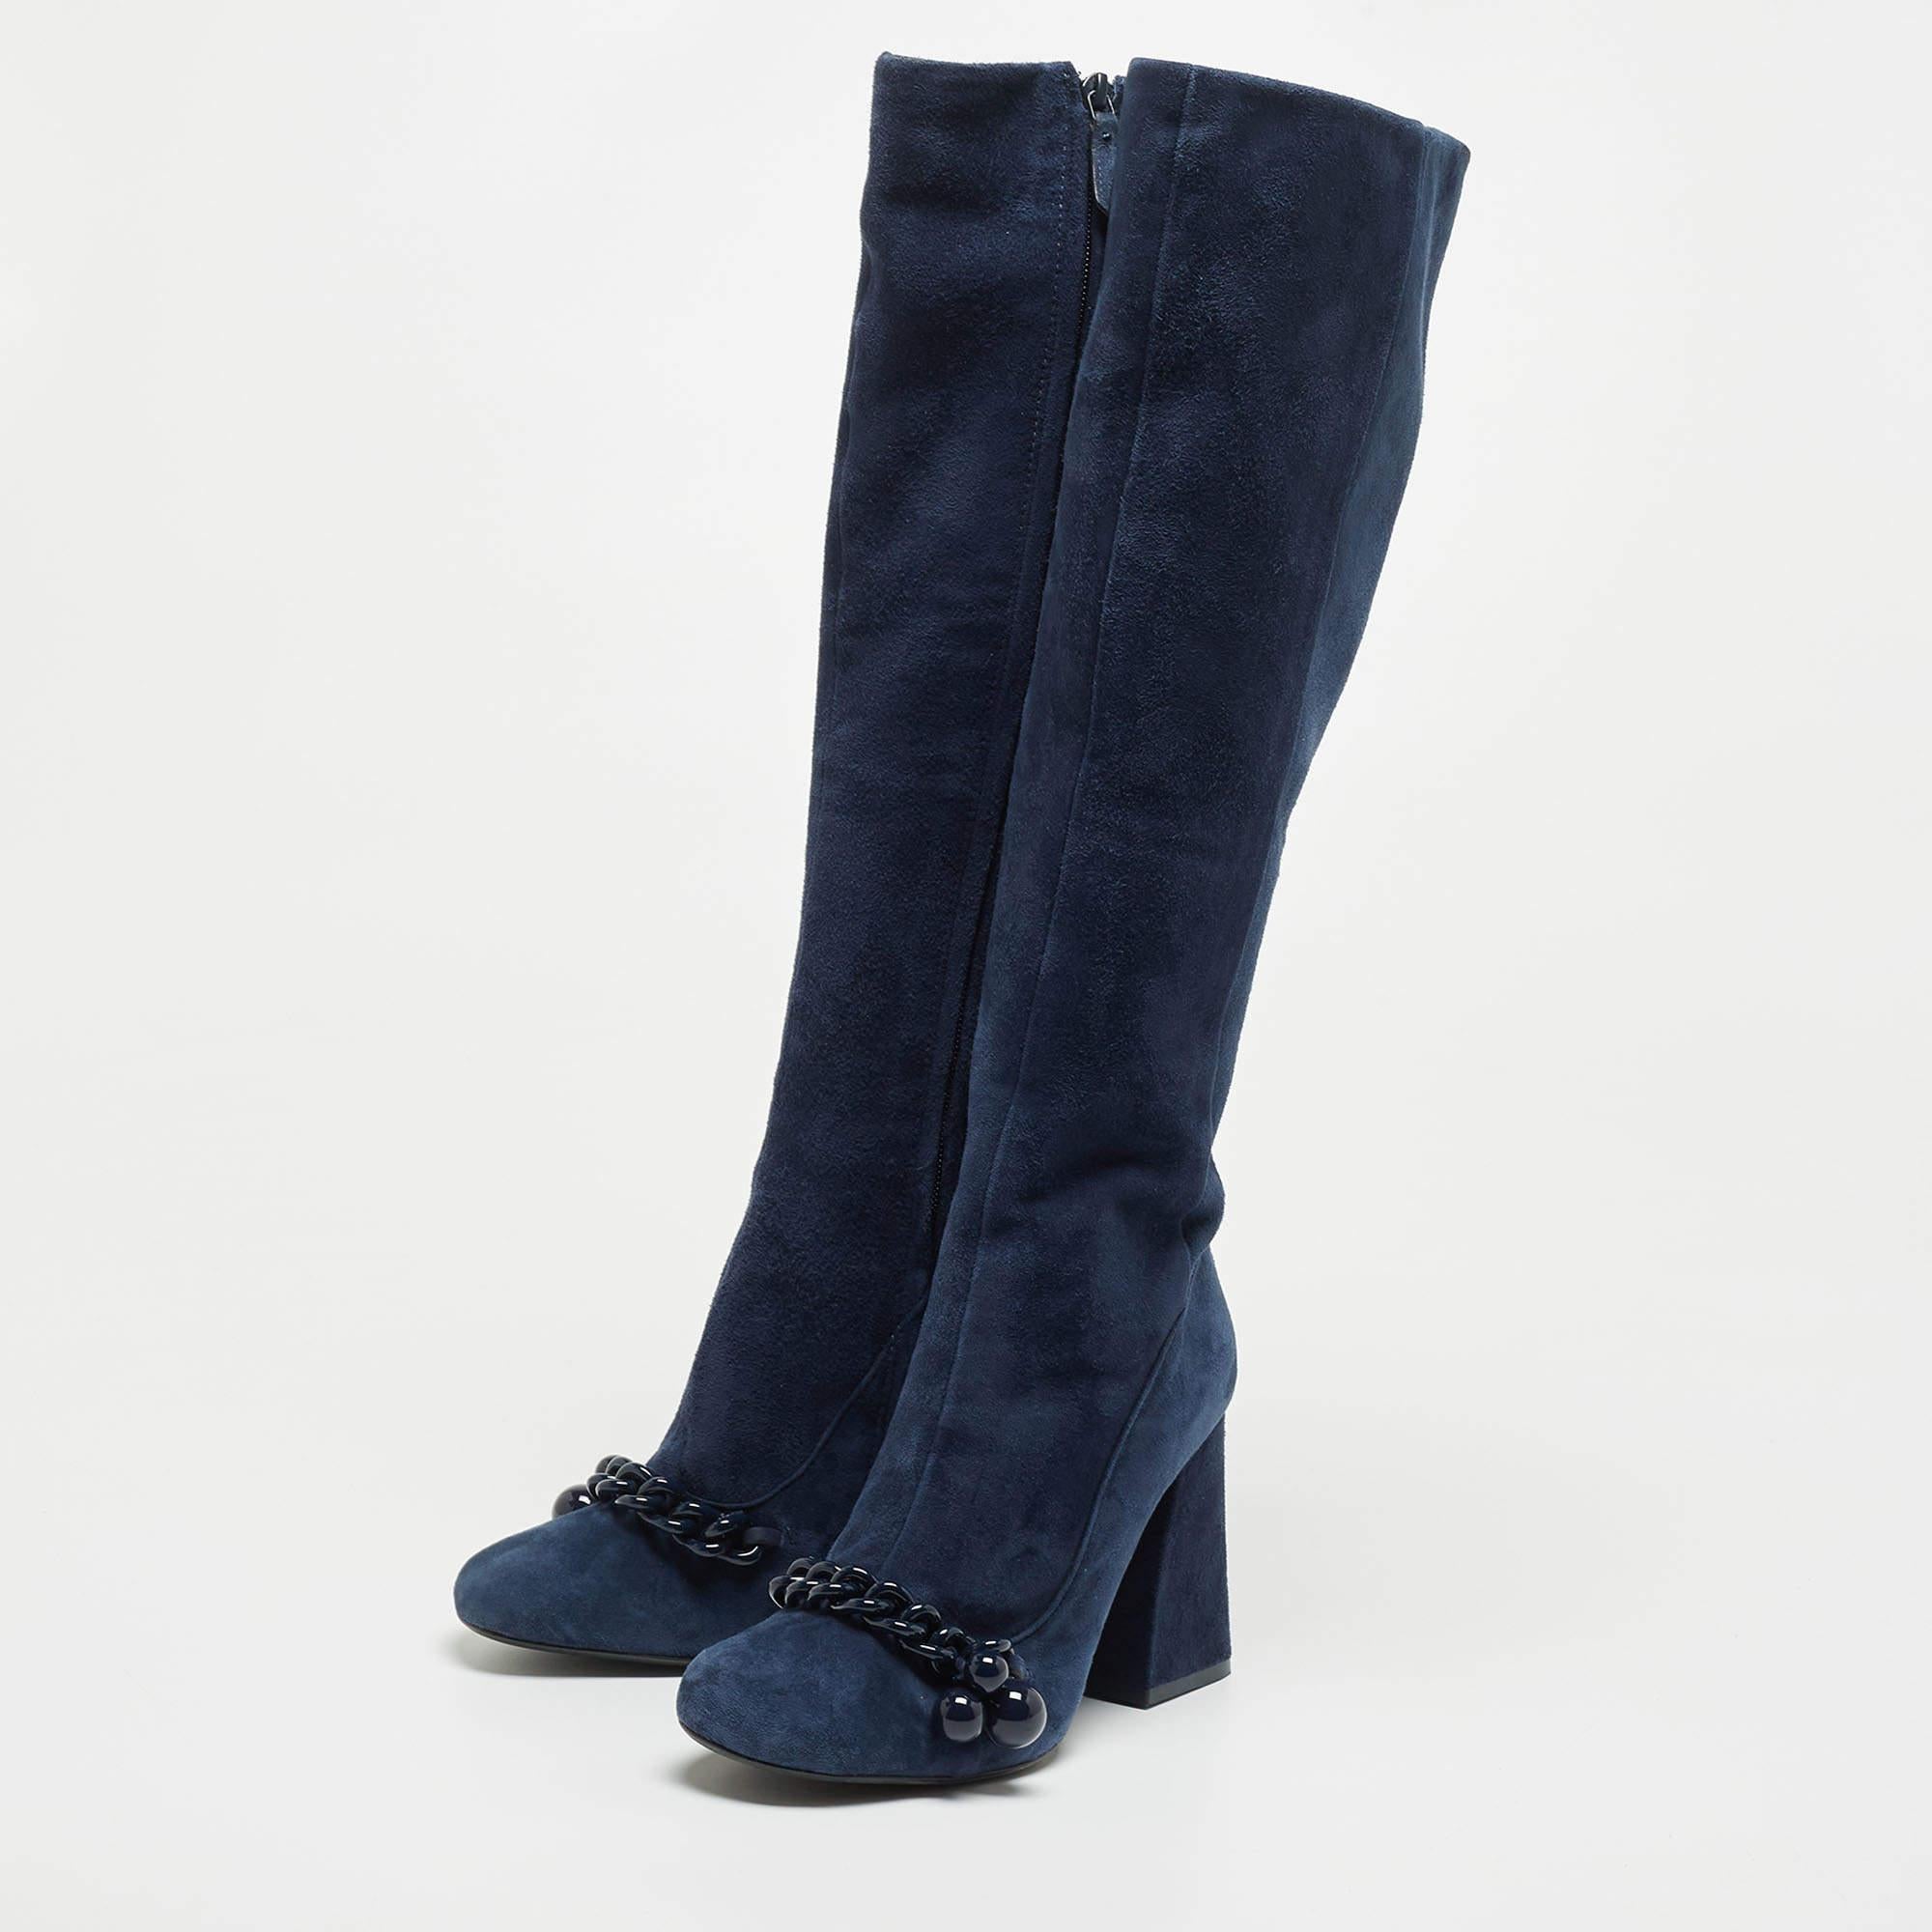 Women's Tory Burch Navy Blue Suede Knee Length Boots Size 37